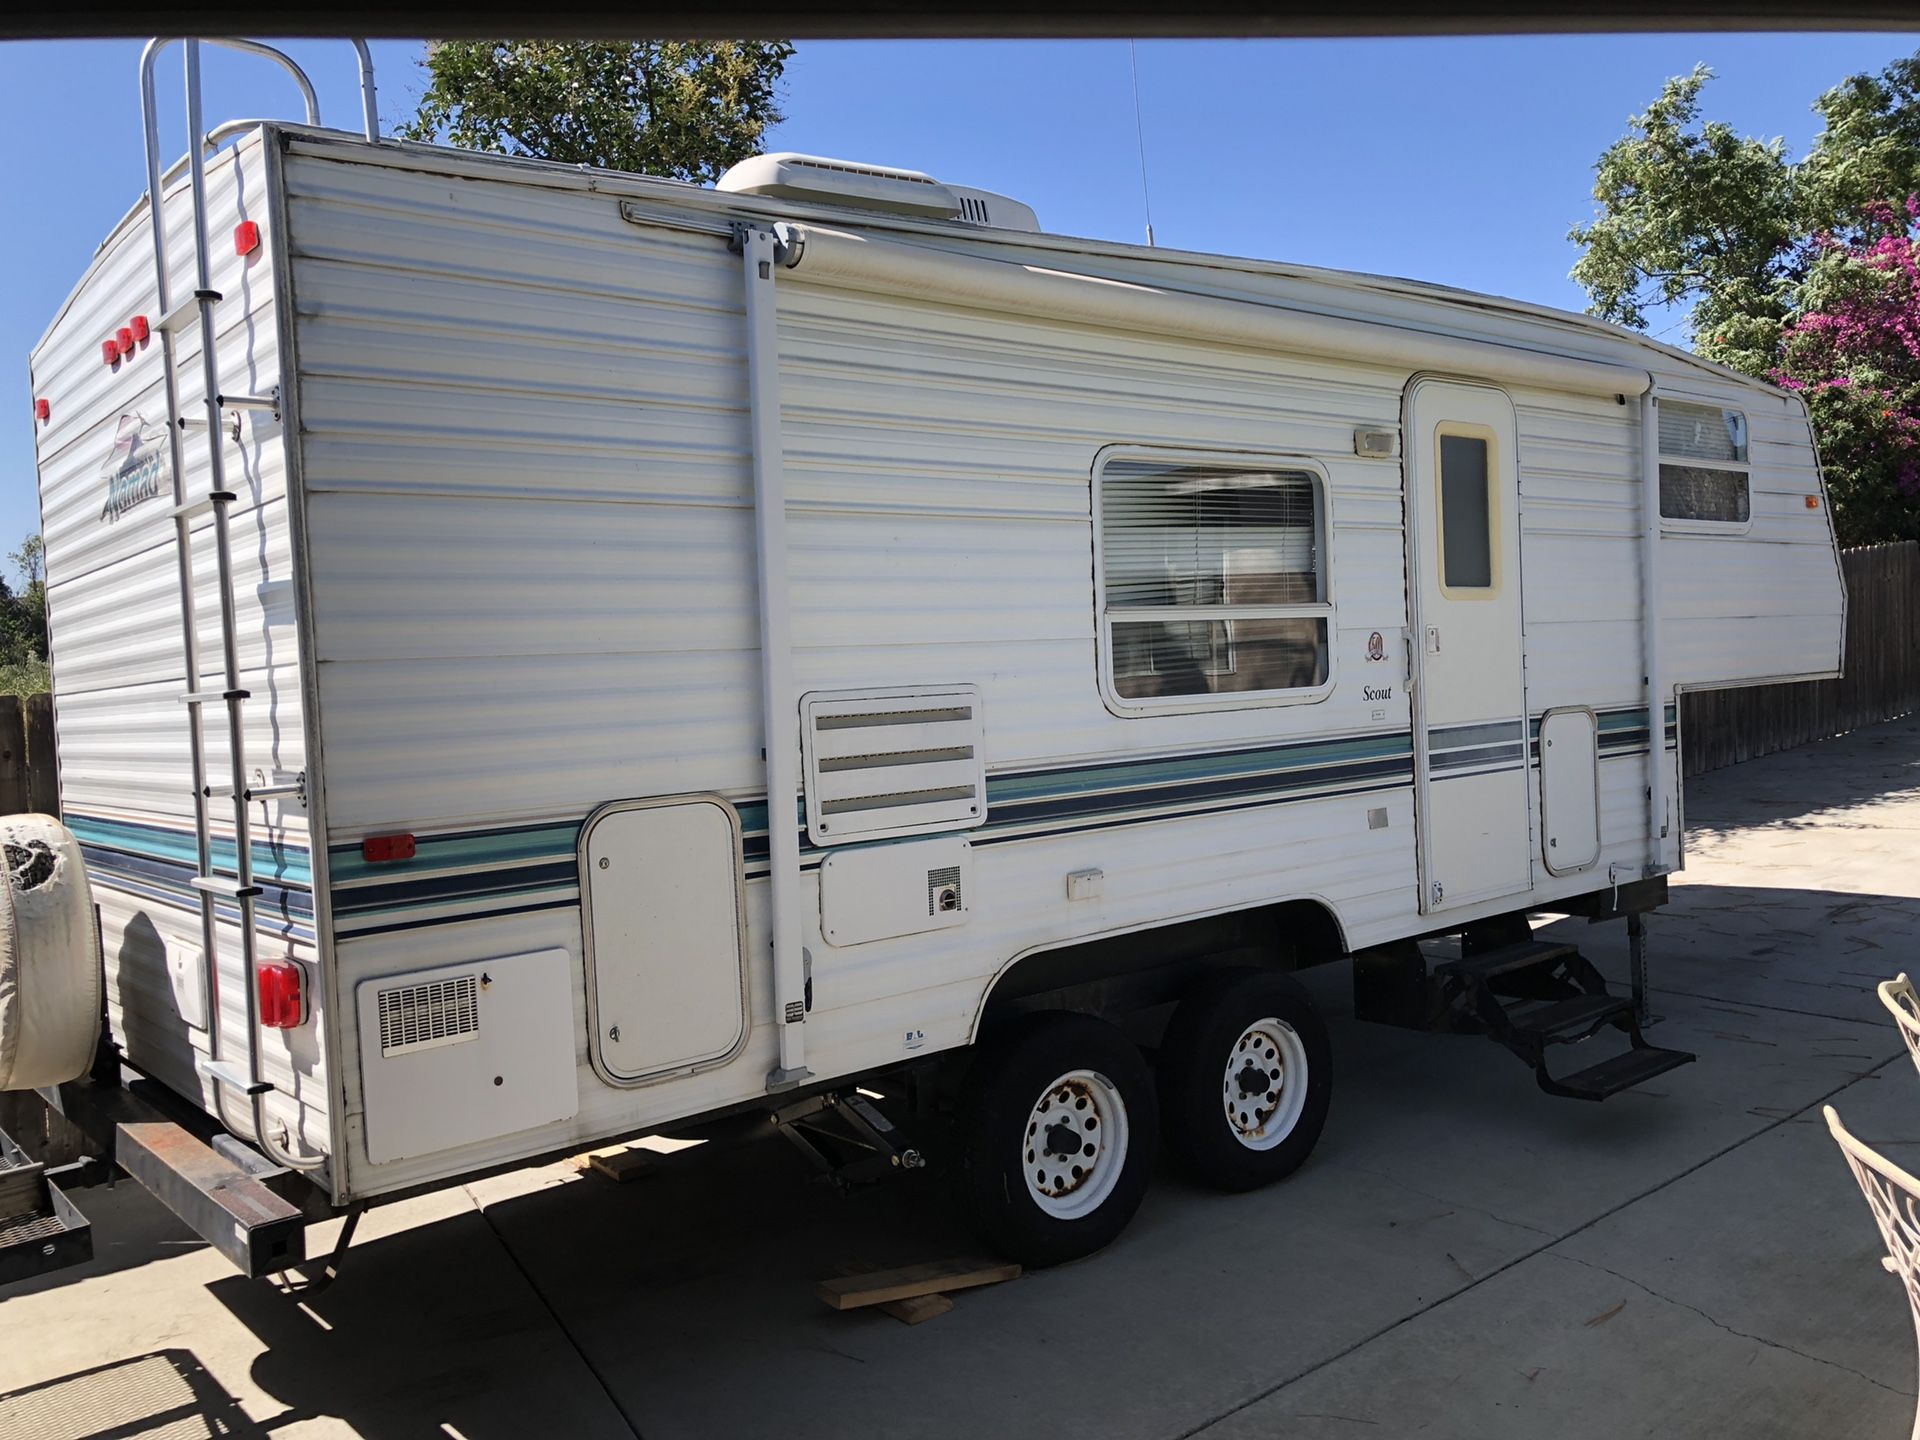 Nomad 23’ fifth wheel trailer